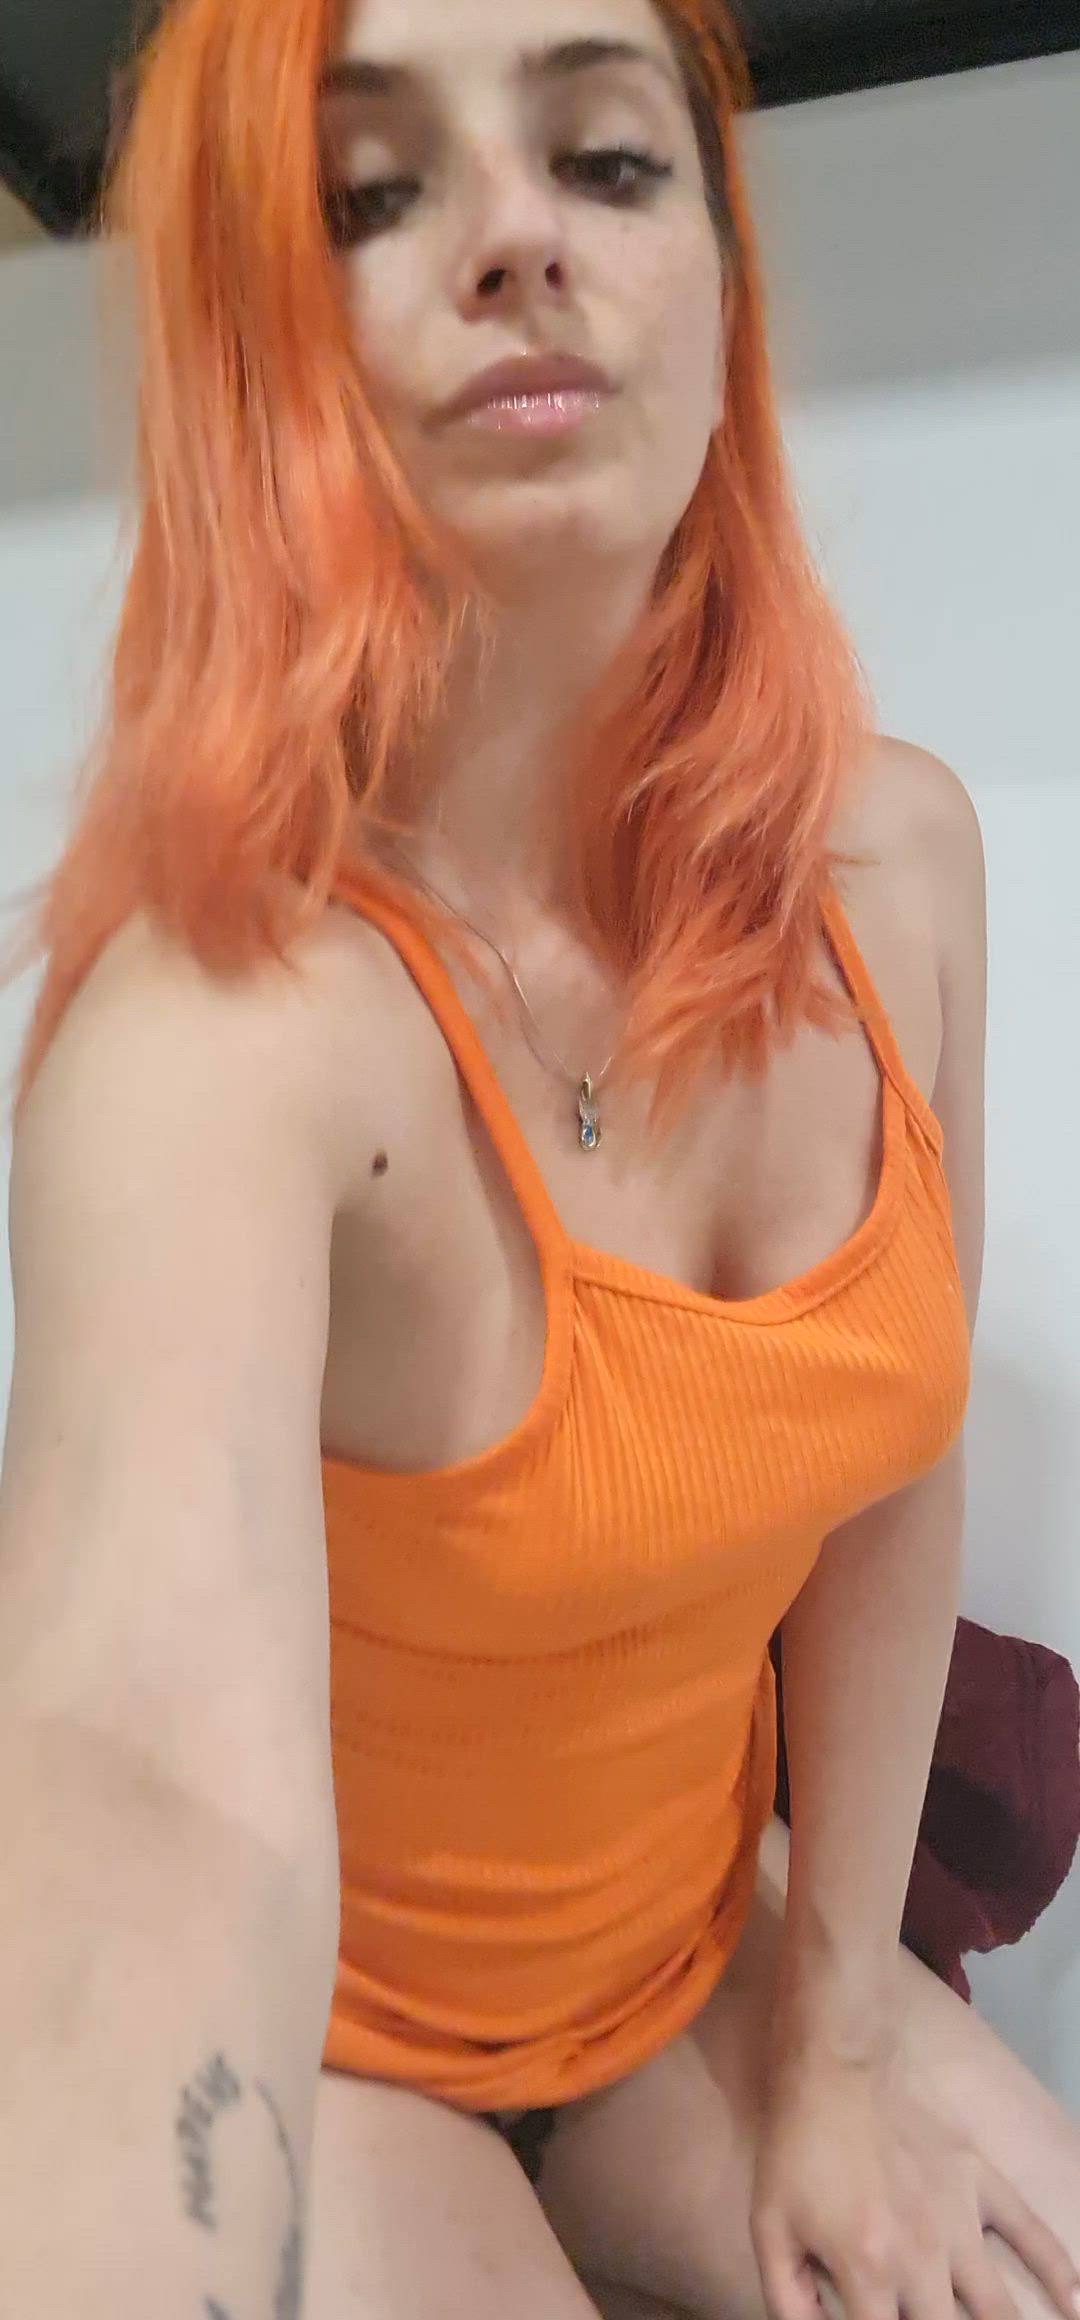 Big Tits porn video with onlyfans model carolinefox <strong>@carolinefoxie</strong>